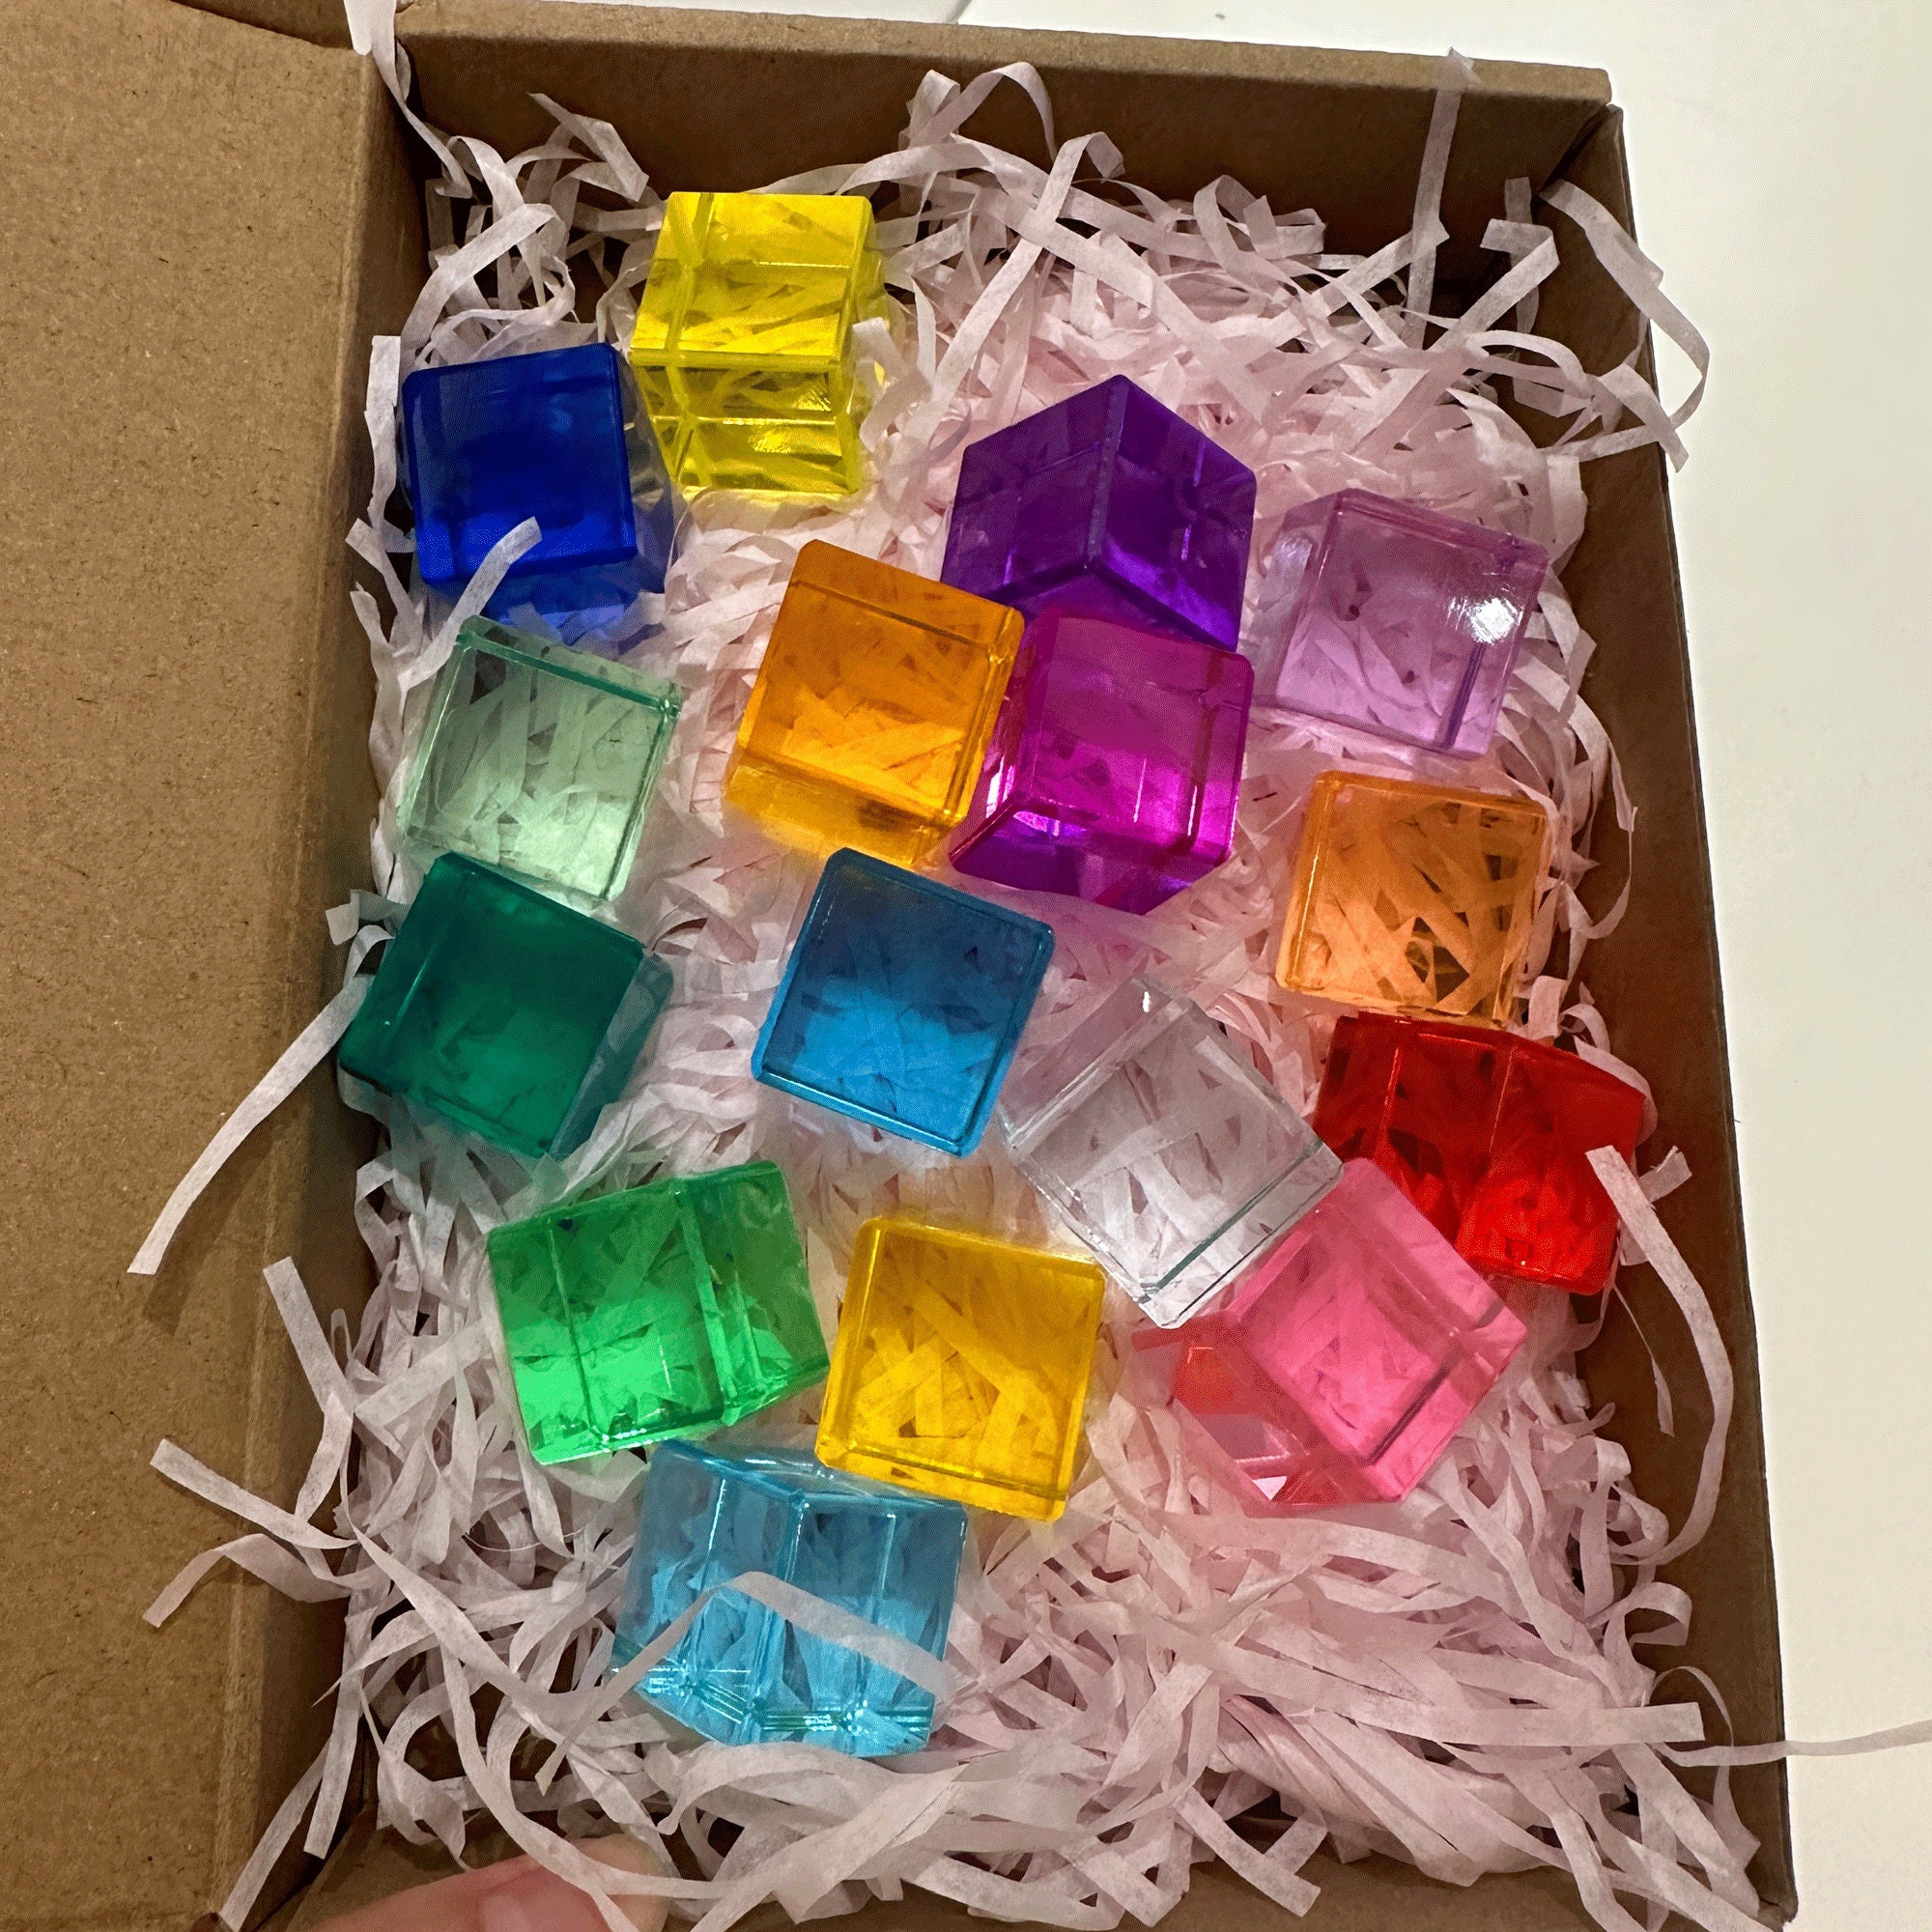 Translucent Rainbow Cubes – The Inspired Toy